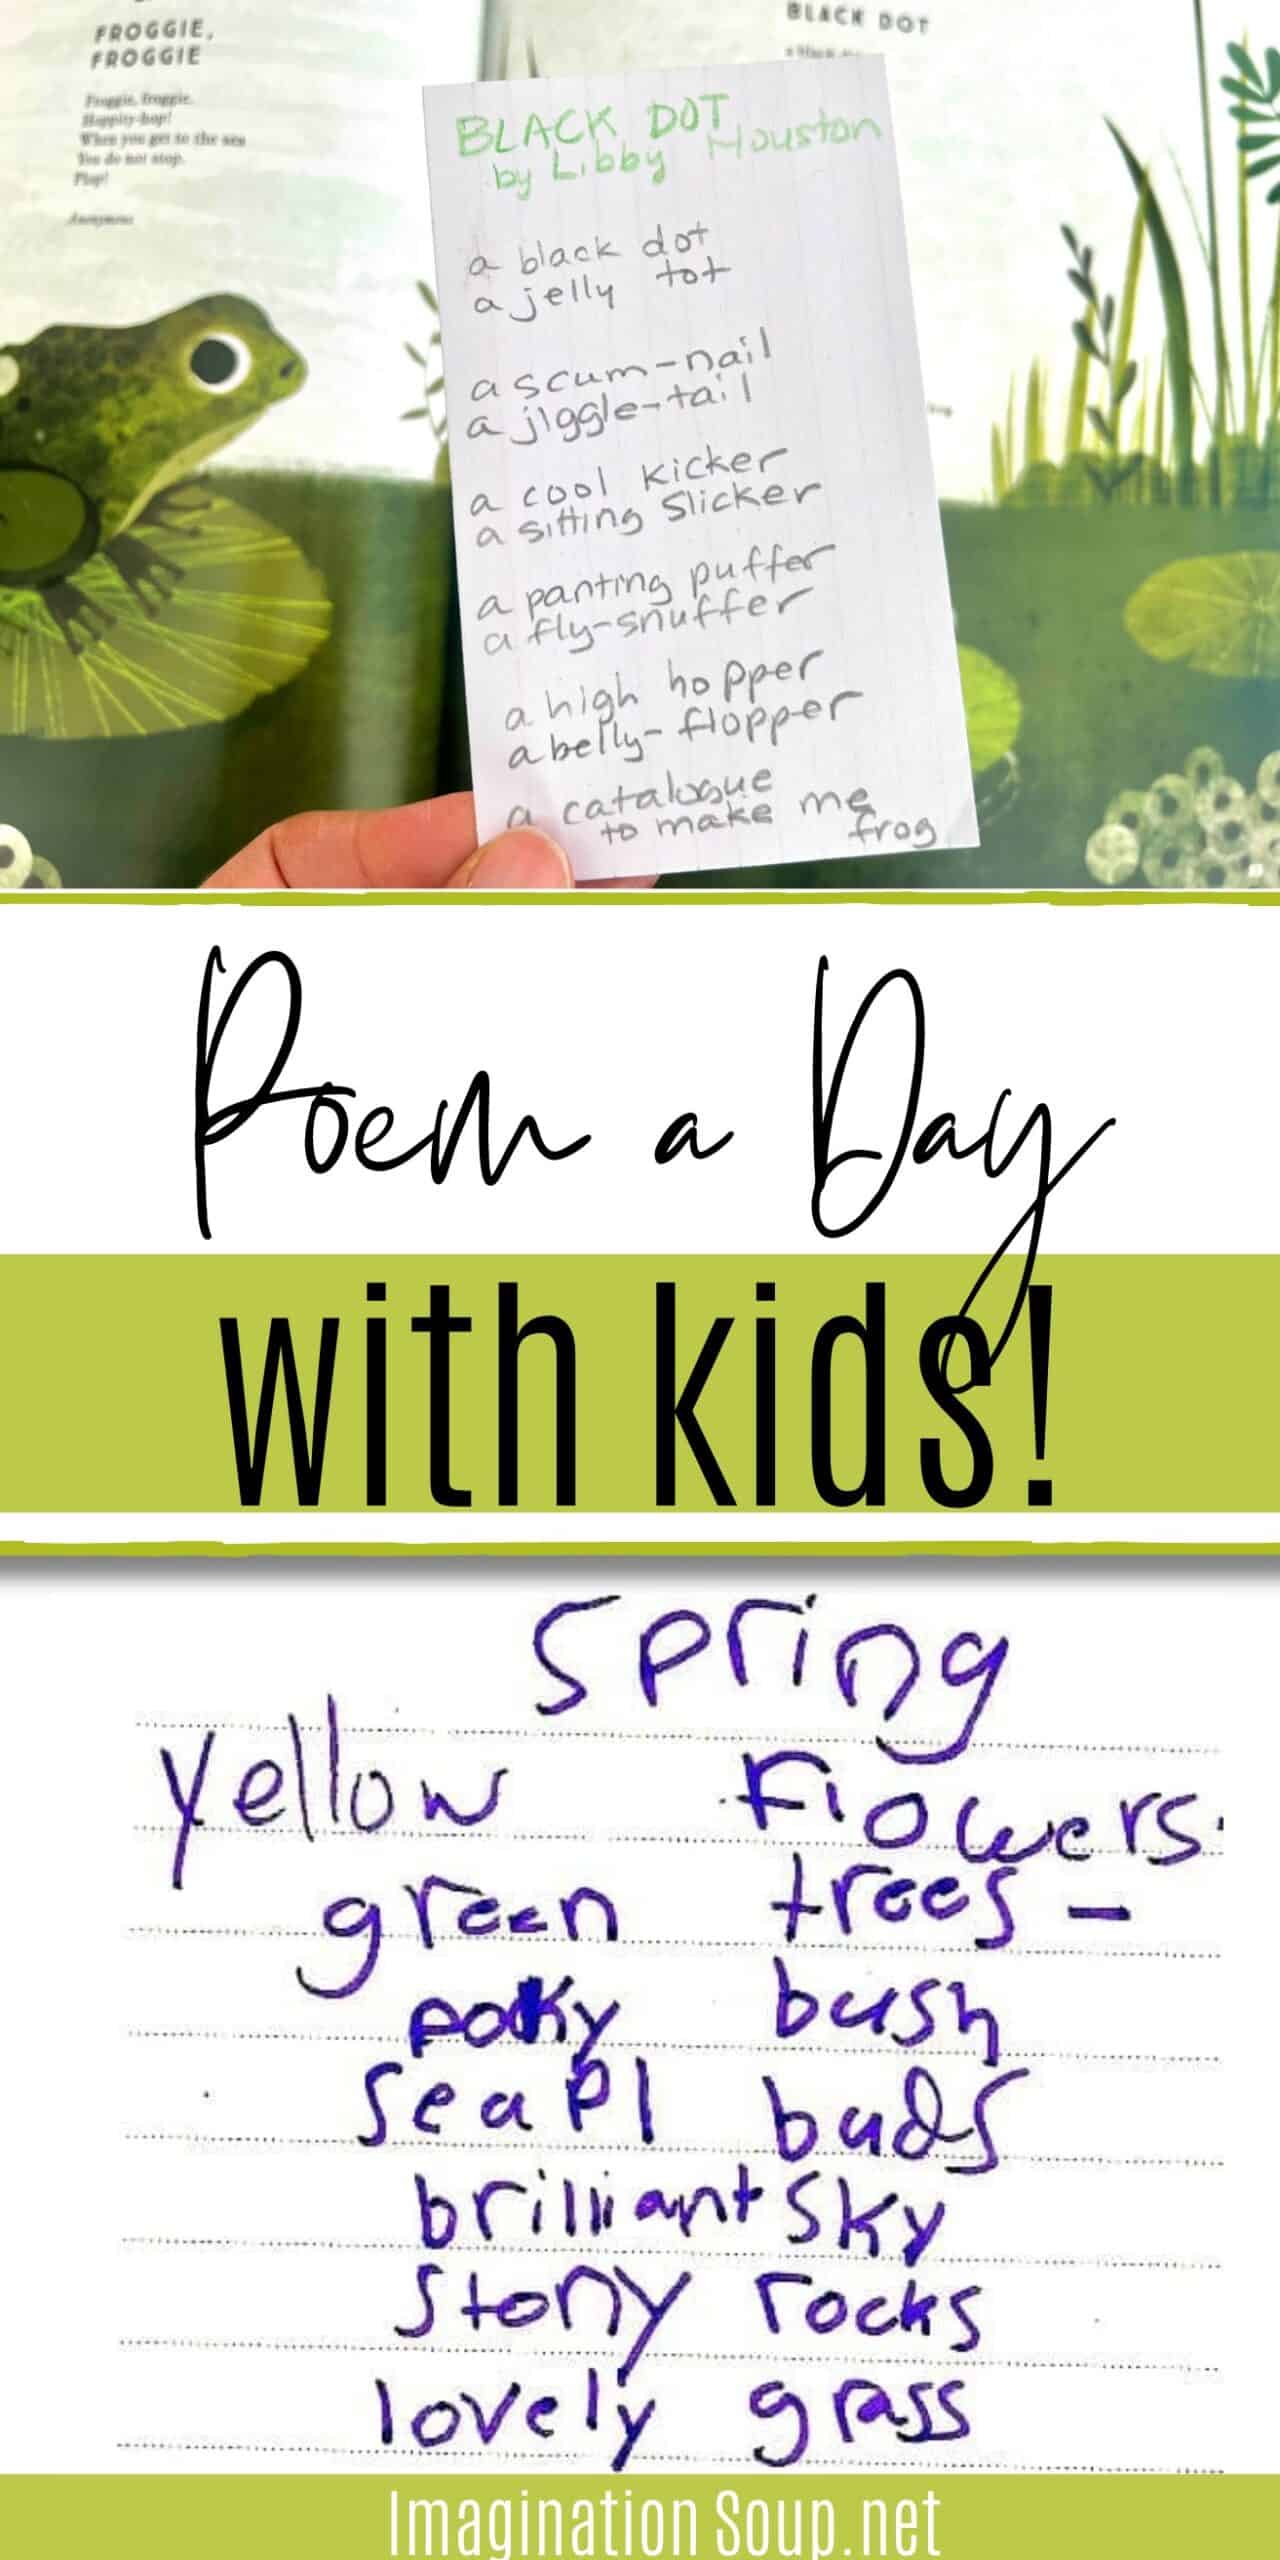 a poem a day daily activities for kids during Poetry Month or any month